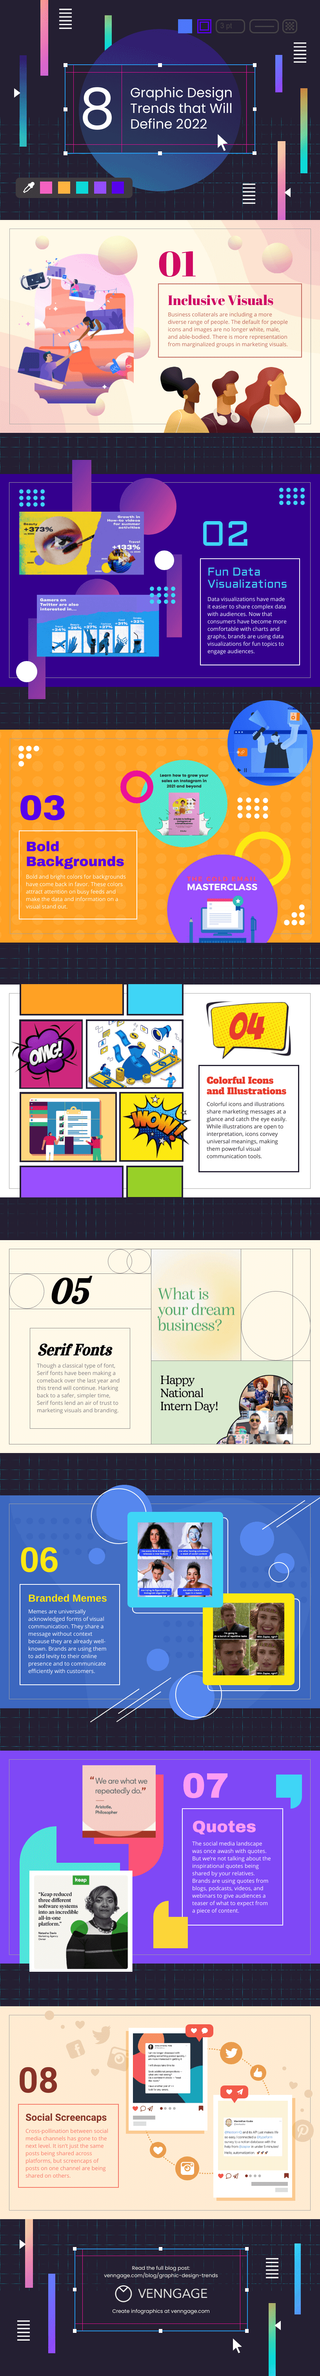 An infographic of 8 graphic design predications.